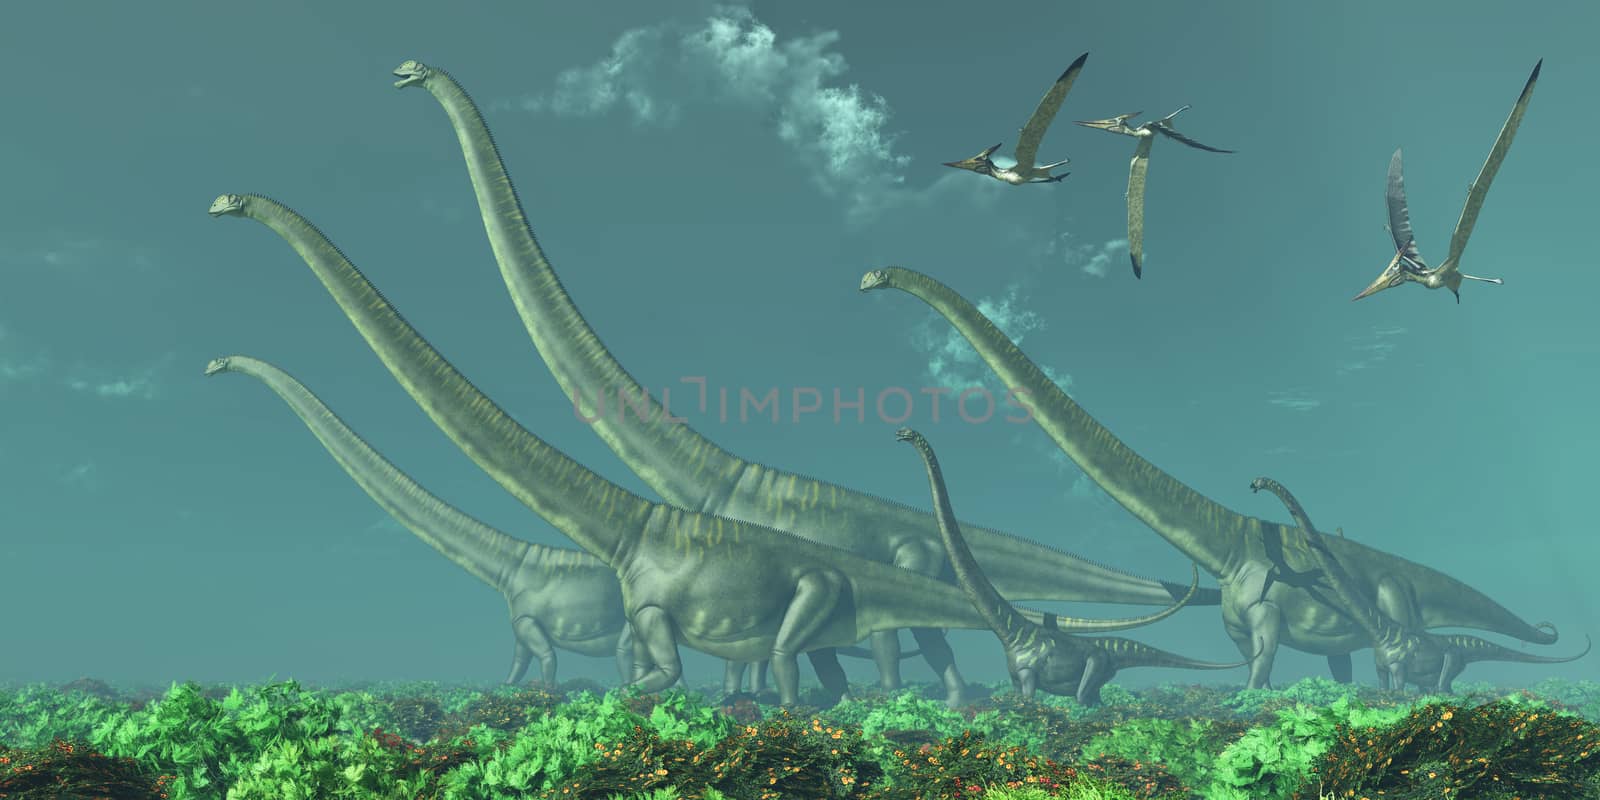 Pteranodon reptiles fly over a herd of Mamenchisaurus dinosaurs in the Cretaceous Era.